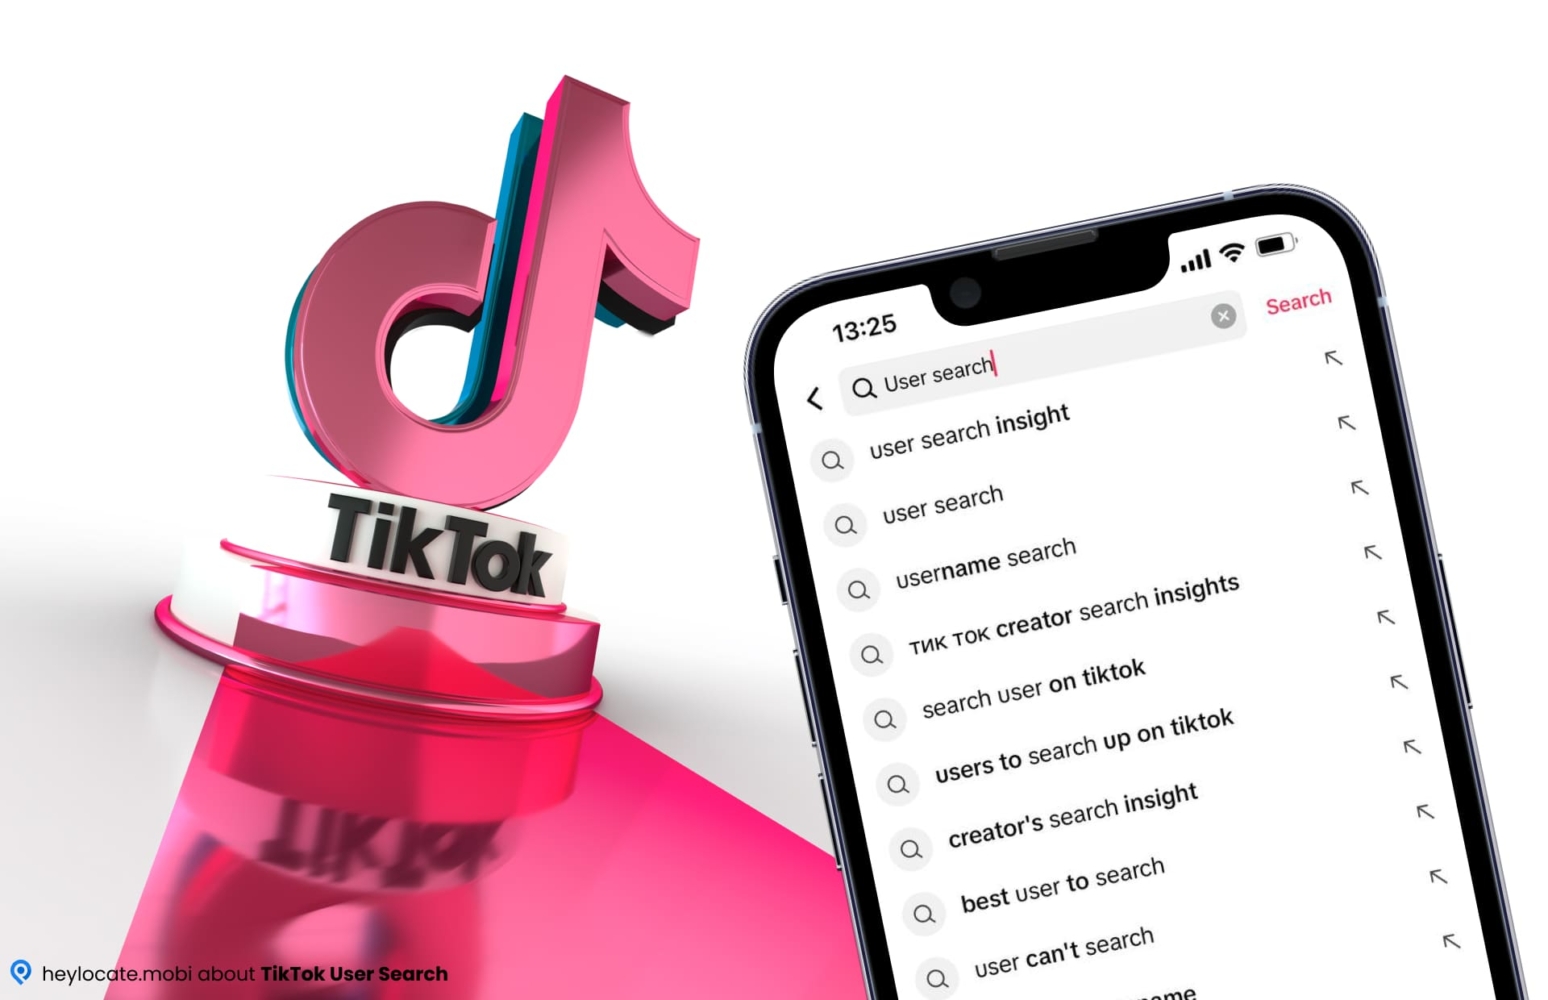 This image shows the concept of user search on the TikTok platform. The foreground shows a cell phone screen with "User Search" in the search bar and various user search and preview options. The background depicts the TikTok logo in bright pink and blue colors. The overall feel of the image is modern and digitally oriented.